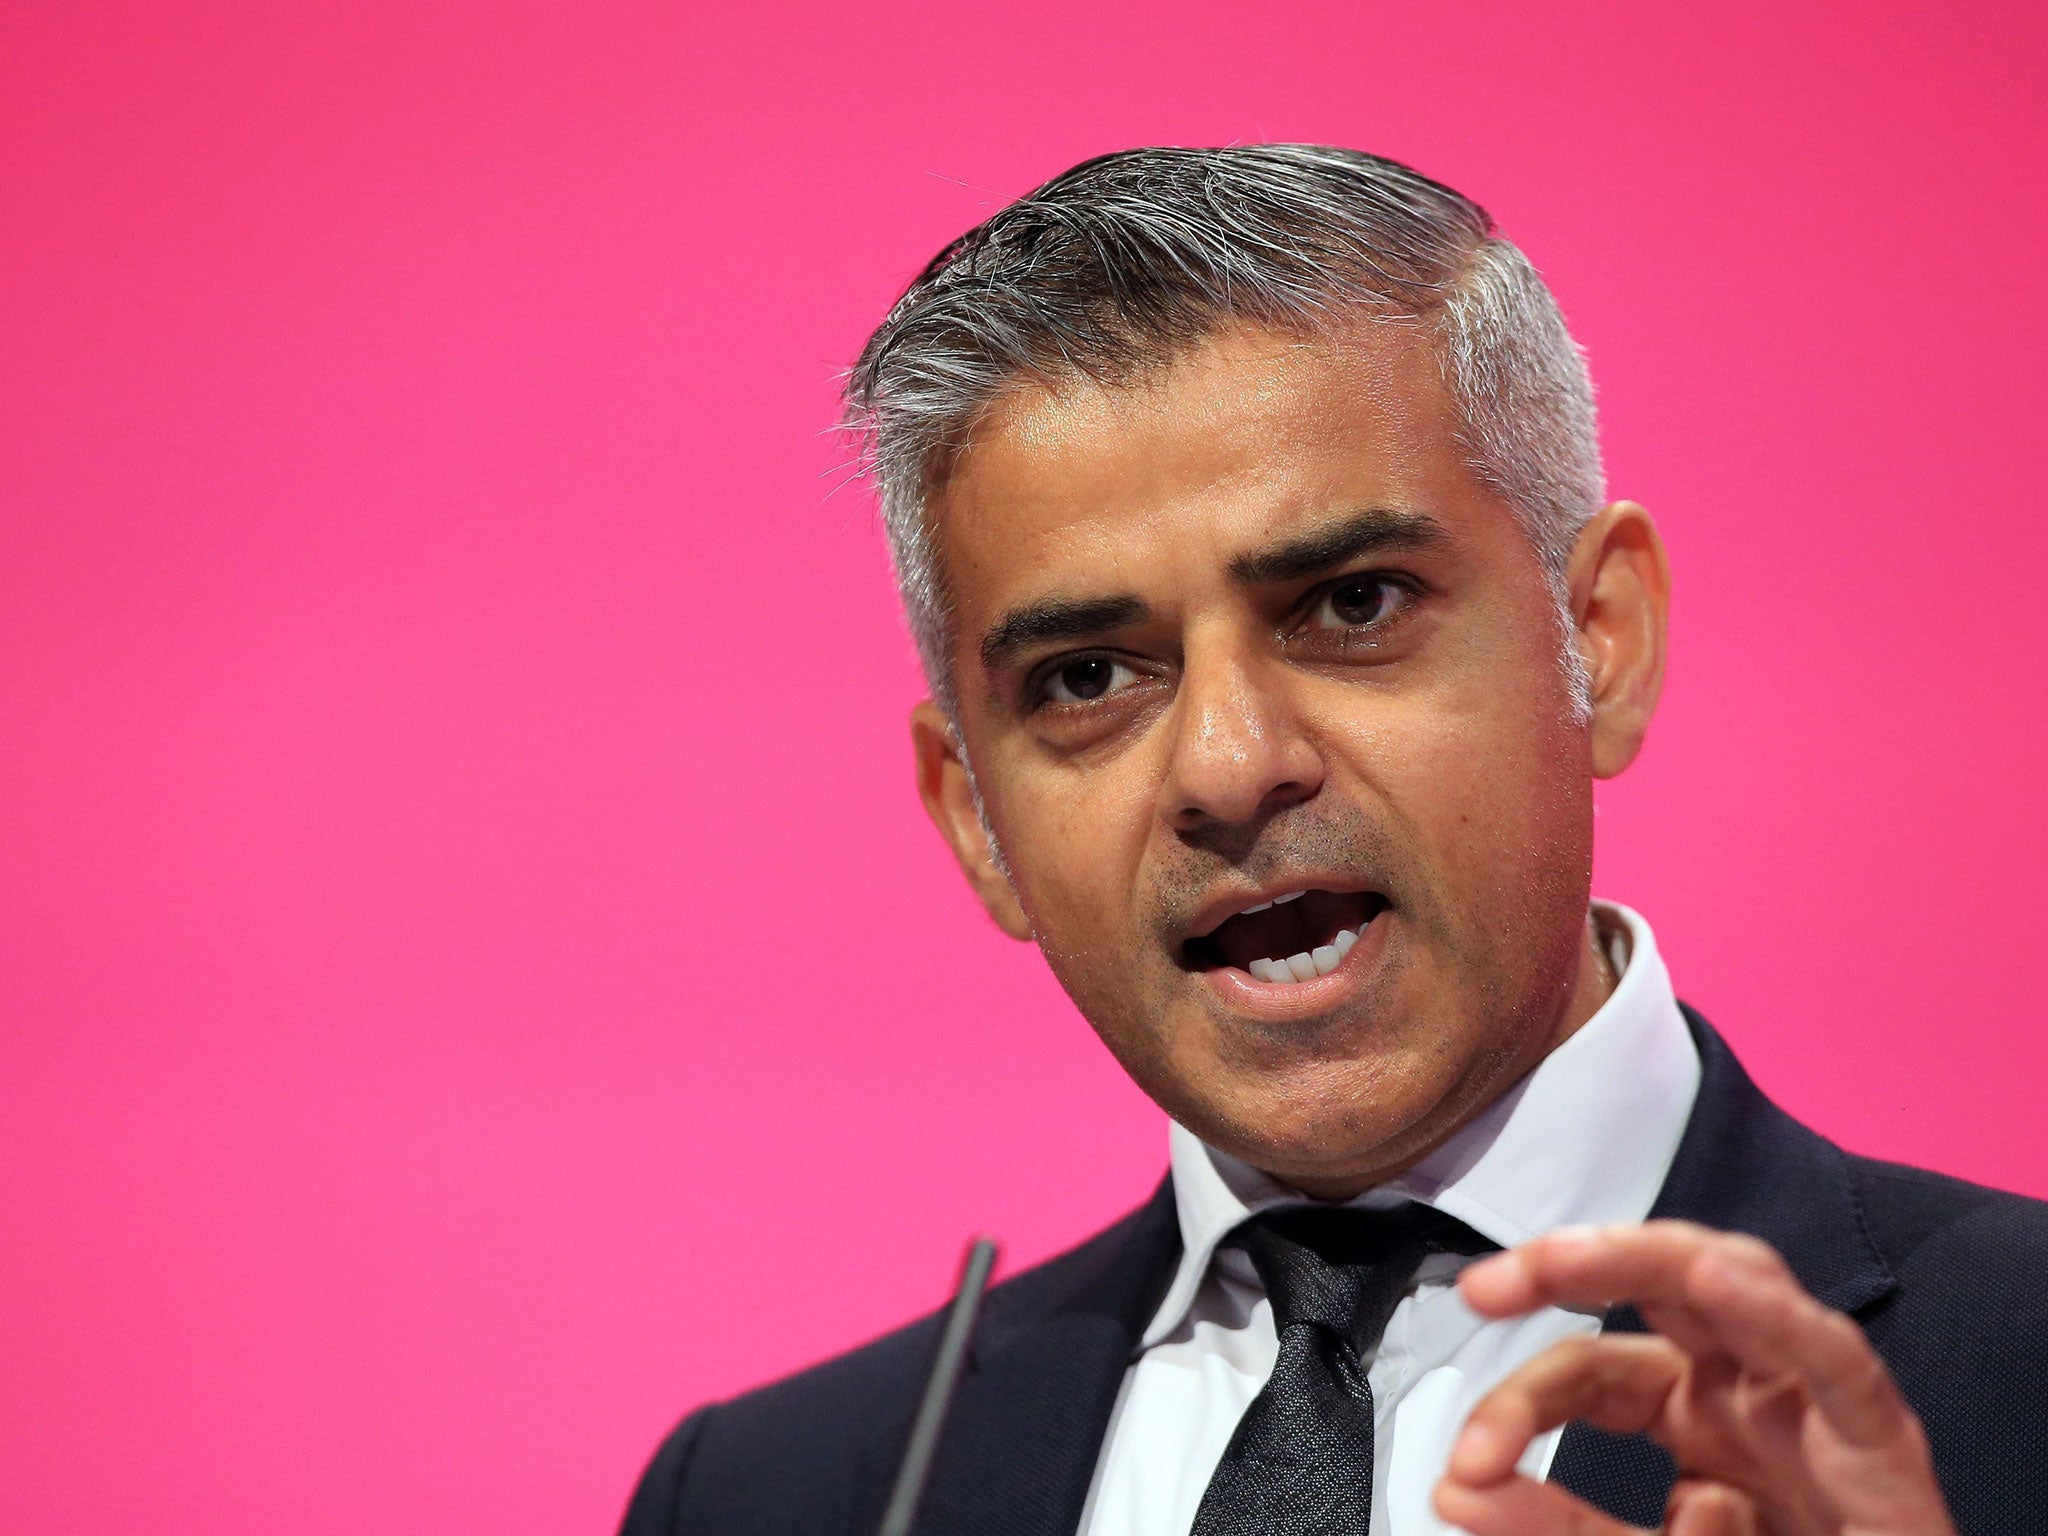 Sadiq Khan is the Labour candidate for Mayor of London